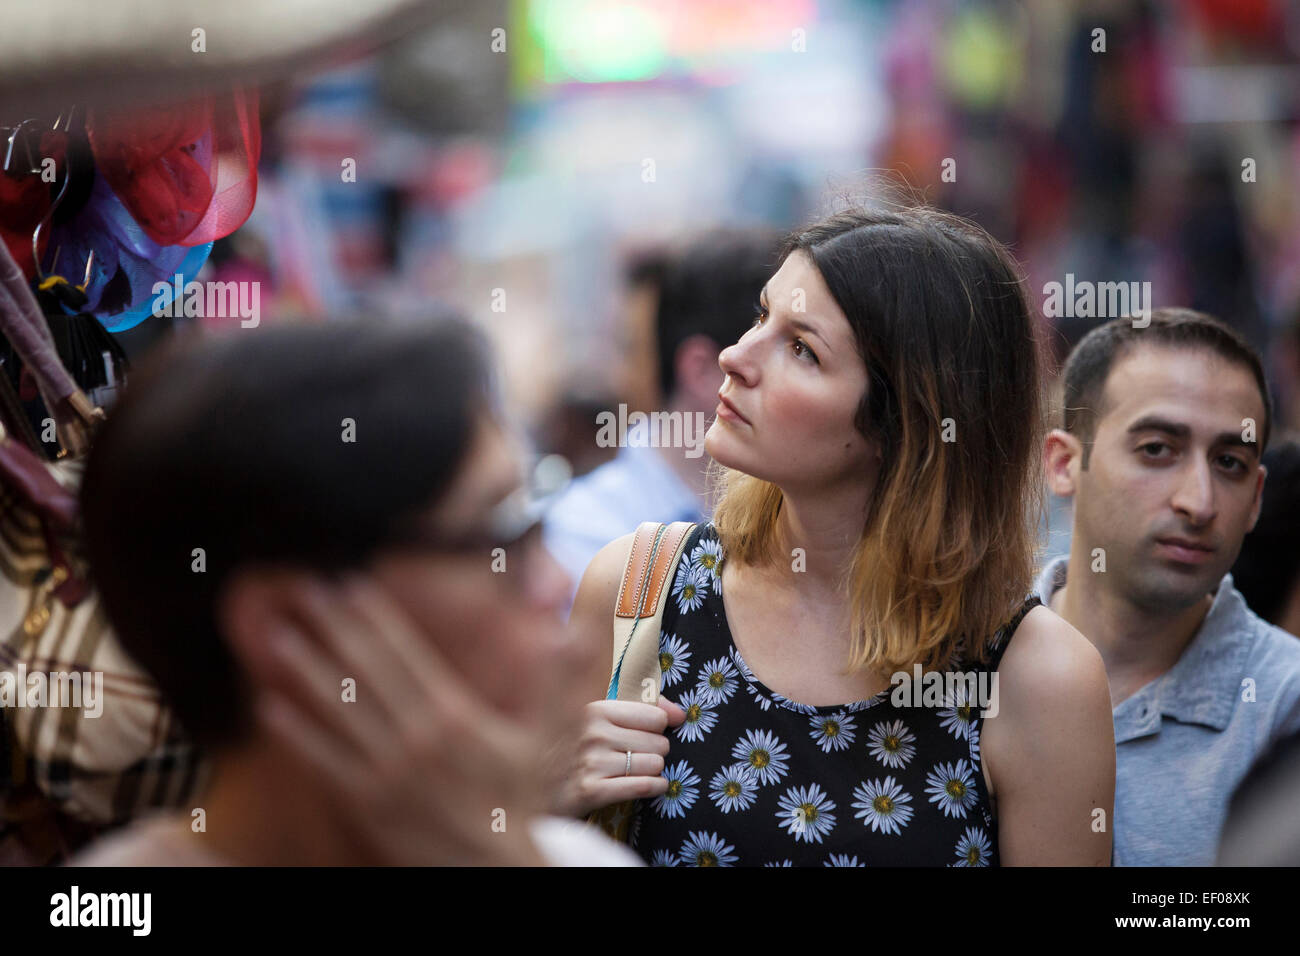 A woman shopping in a crowded street market in Hong Kong Stock Photo